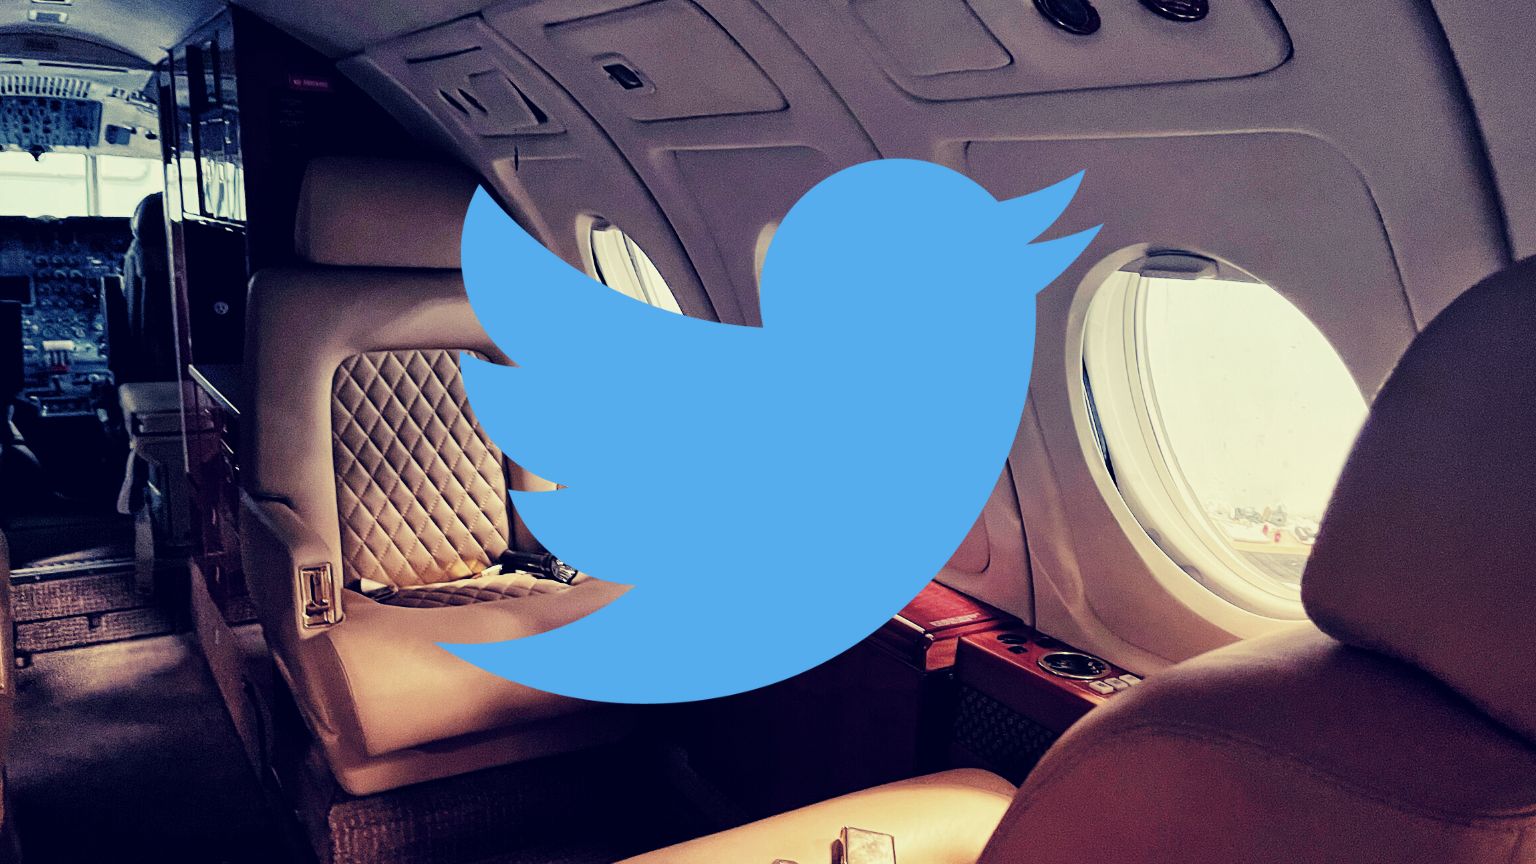 Twitter bans @ElonJet account that showed location of Elon Musk’s private jet